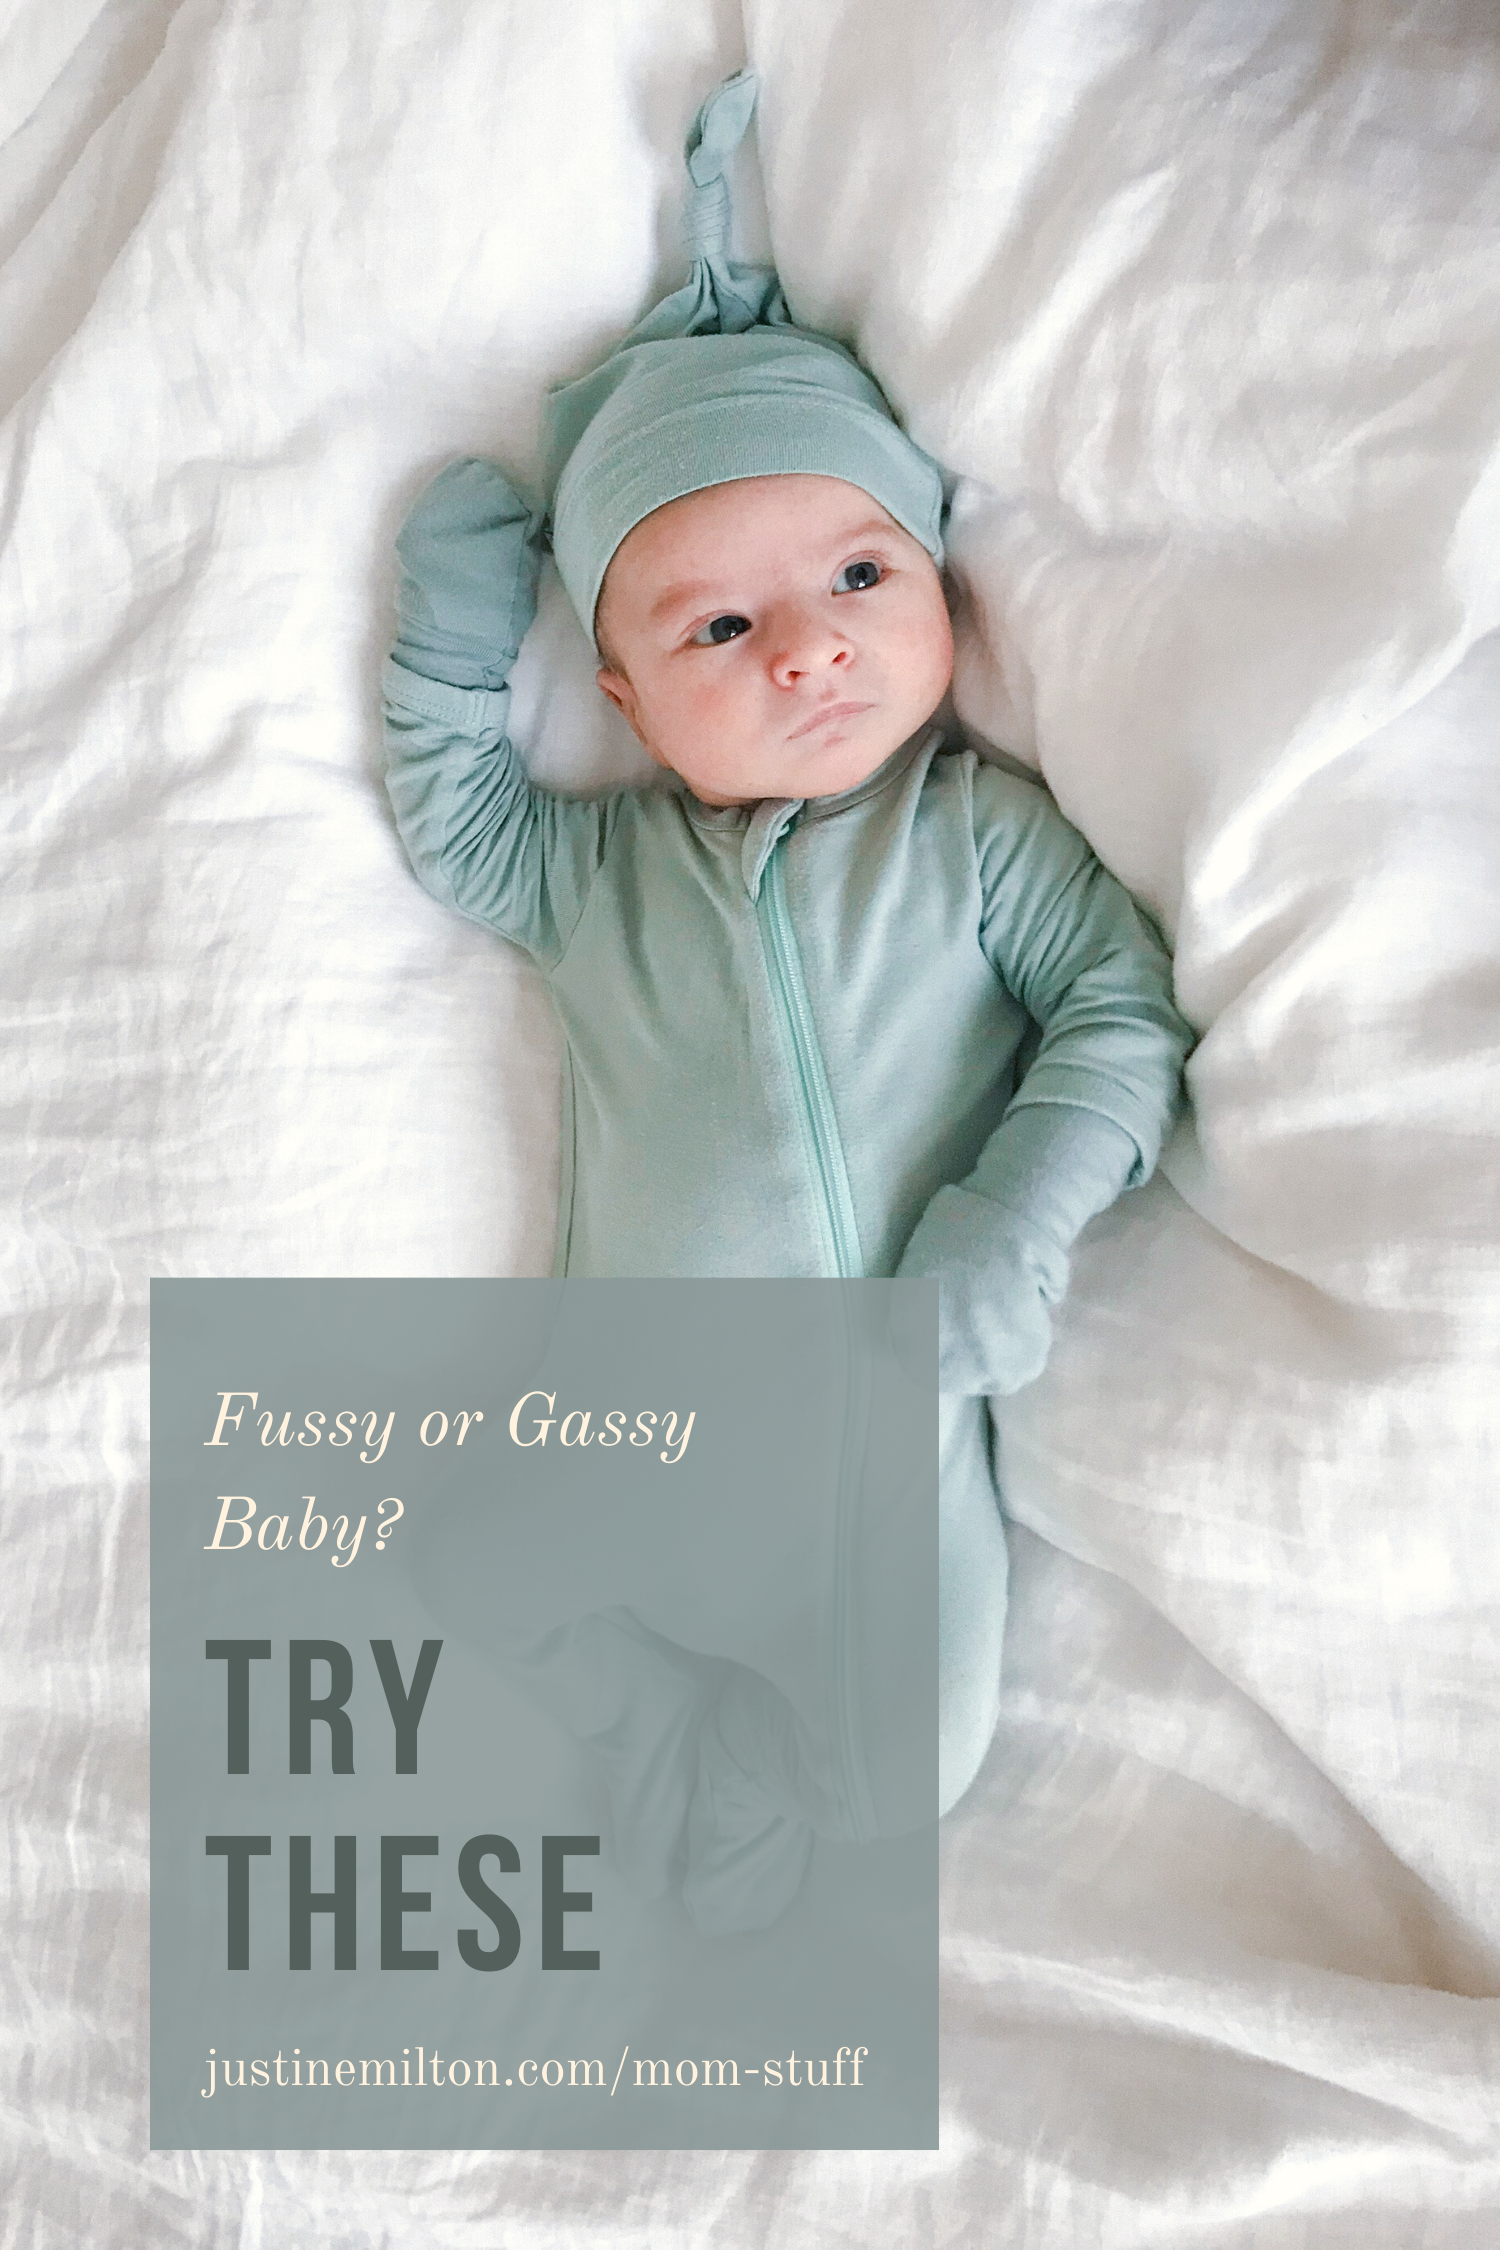 Fussy or gassy baby? Try these!